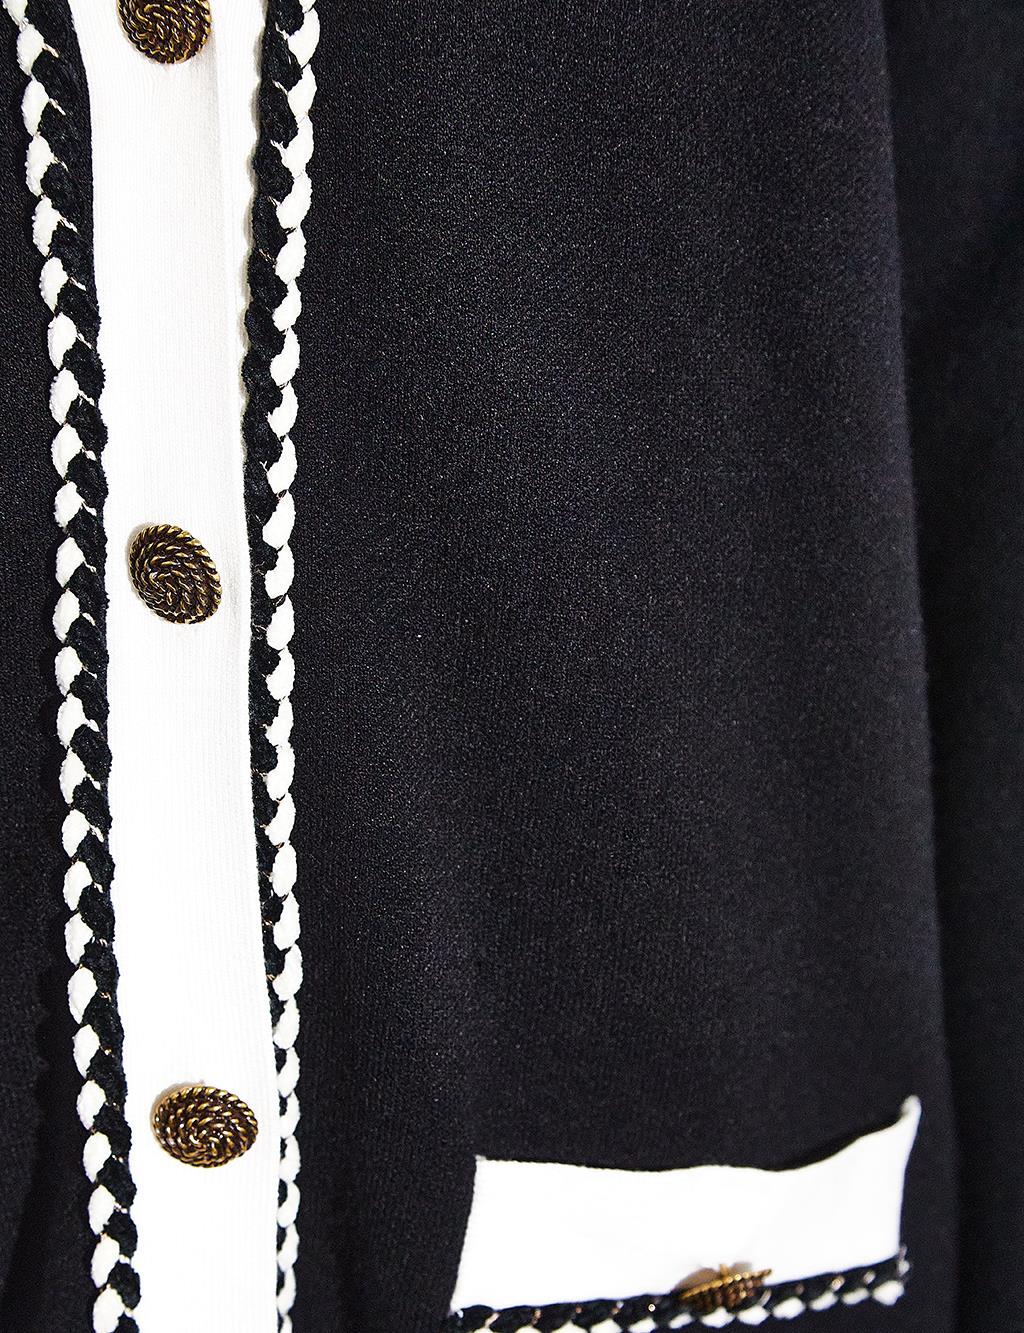 Exclusive Knitted Striped Buttoned Knitwear Cardigan Black